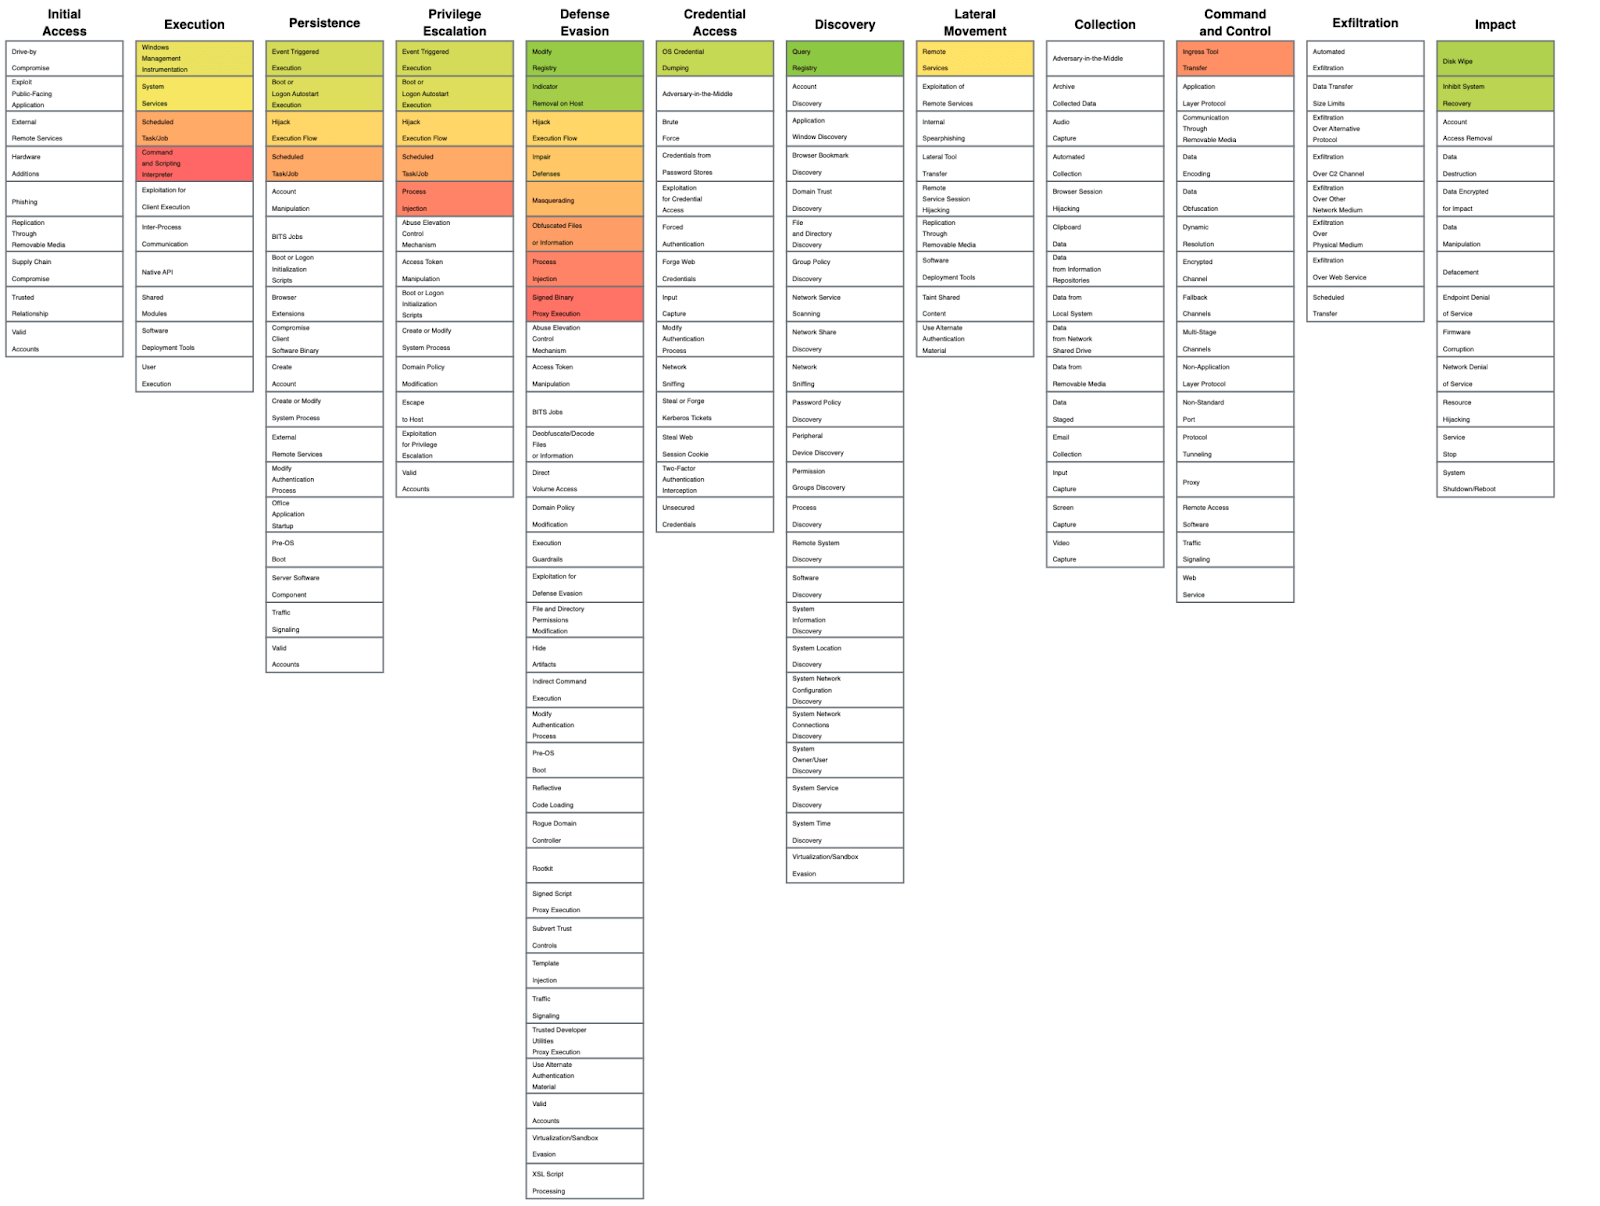 MITRE ATT&CK Navigator layer showing the 20 most prevalent ATT&CK techniques detected by Red Canary during incident response engagements